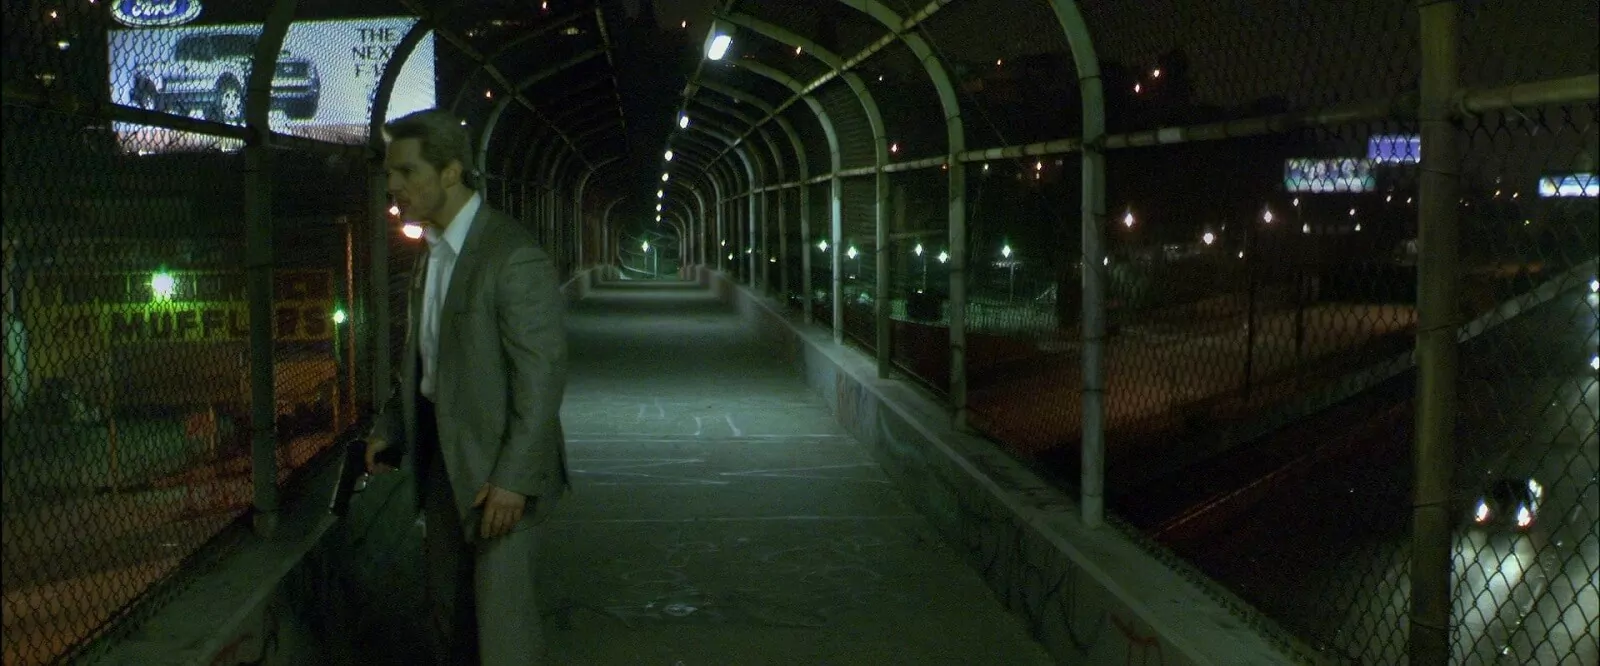 Collateral Explained - Mann found the perfect overpass for this Collateral movie scene